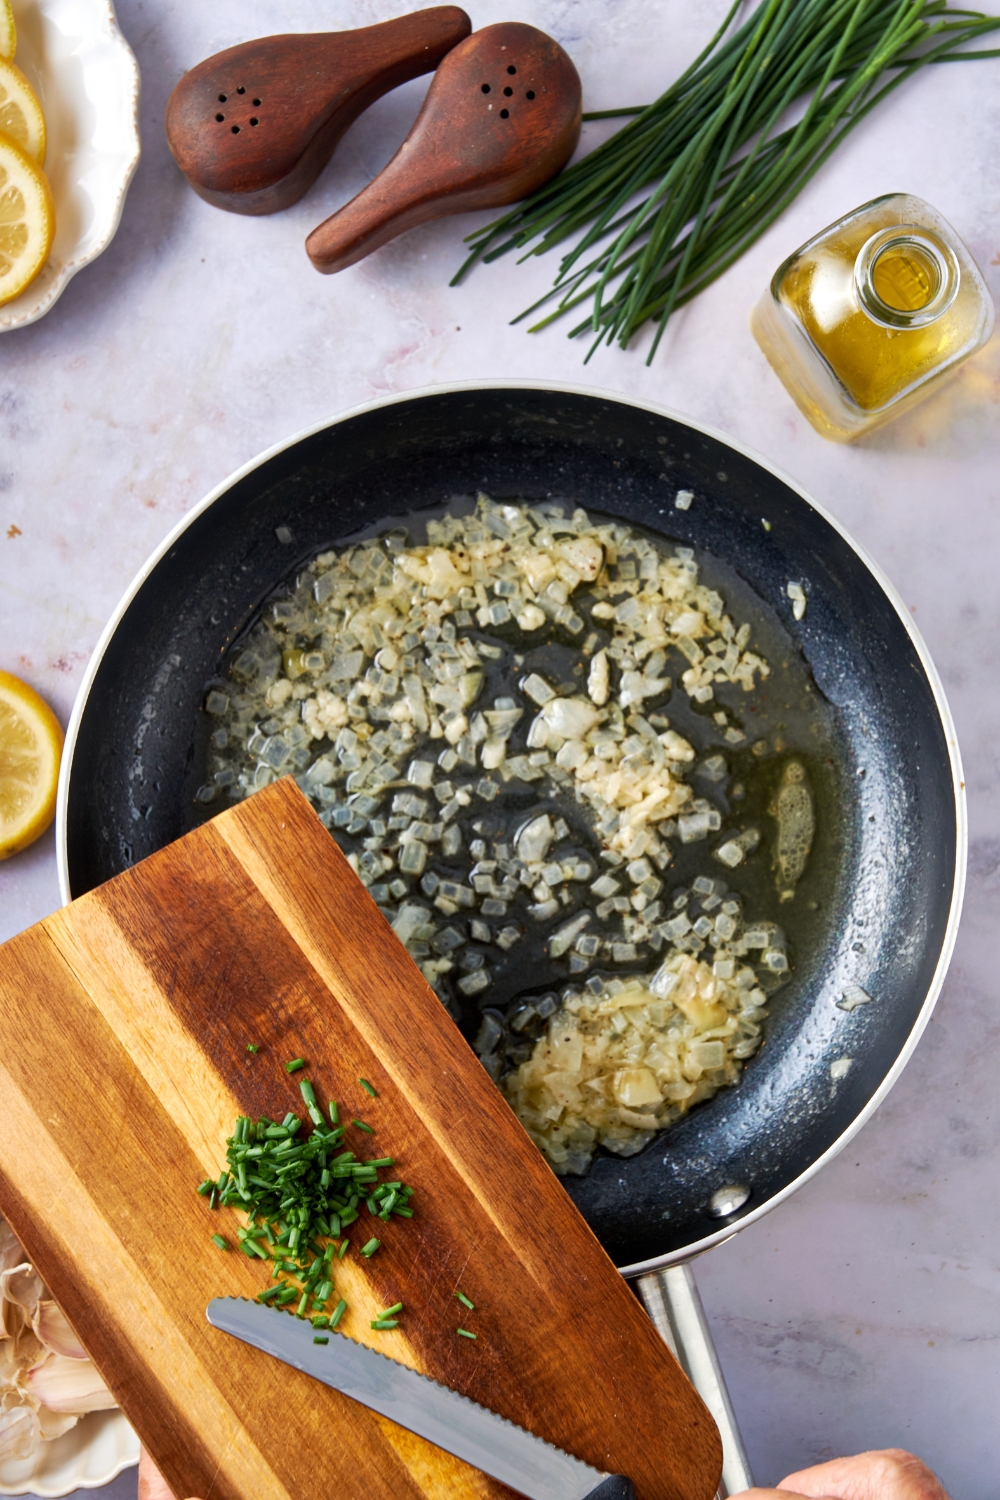 Minced garlic, and onions are in a black frying pan. Someone scrapes minced chives from a wooden cutting board into the pan.